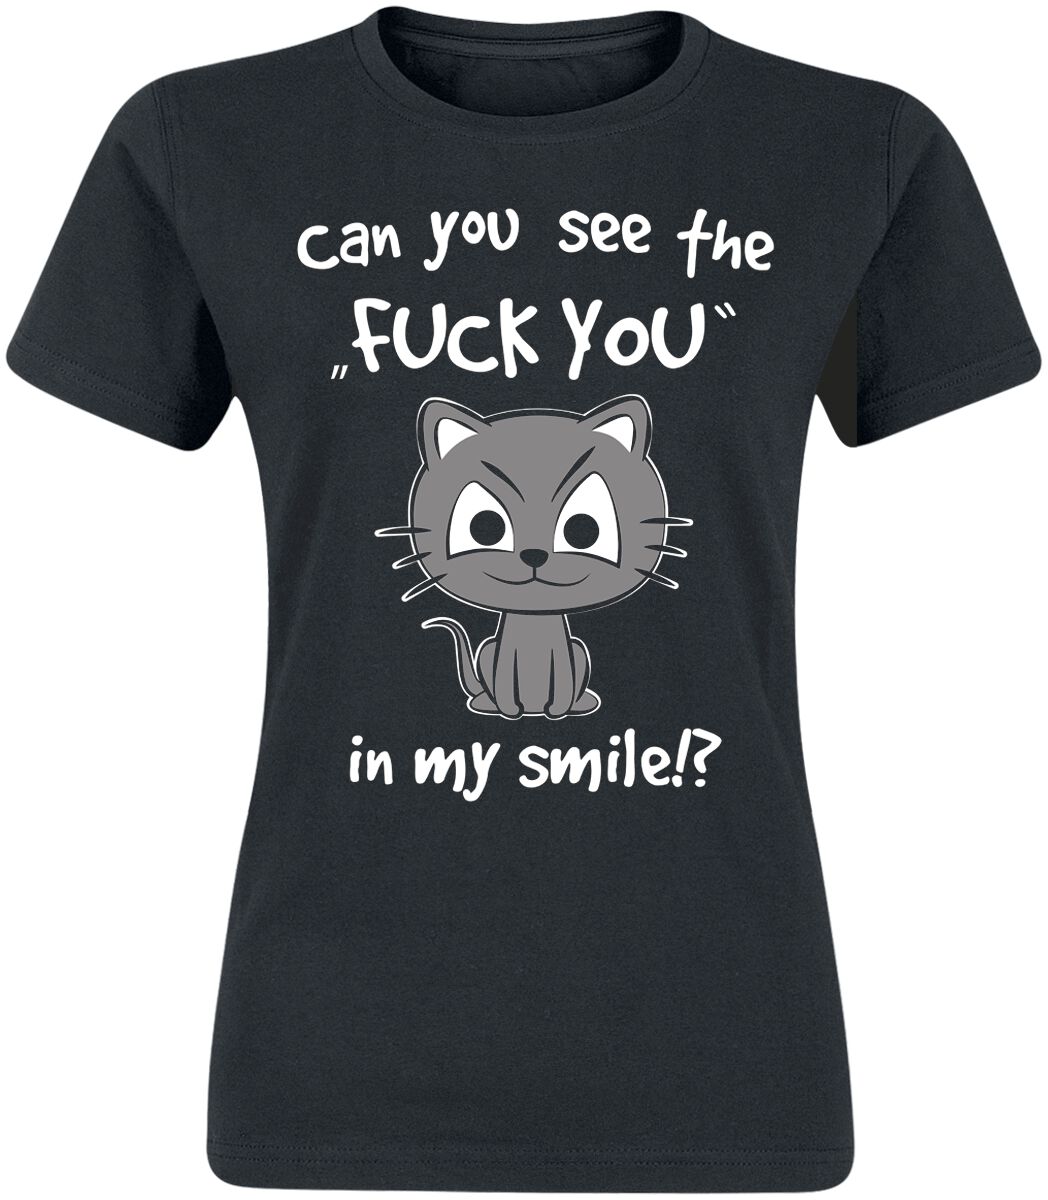 T-Shirt Manches courtes Fun de Tierisch - Can You See The Fuck You In My Smile!? - S à 3XL - pour Fe